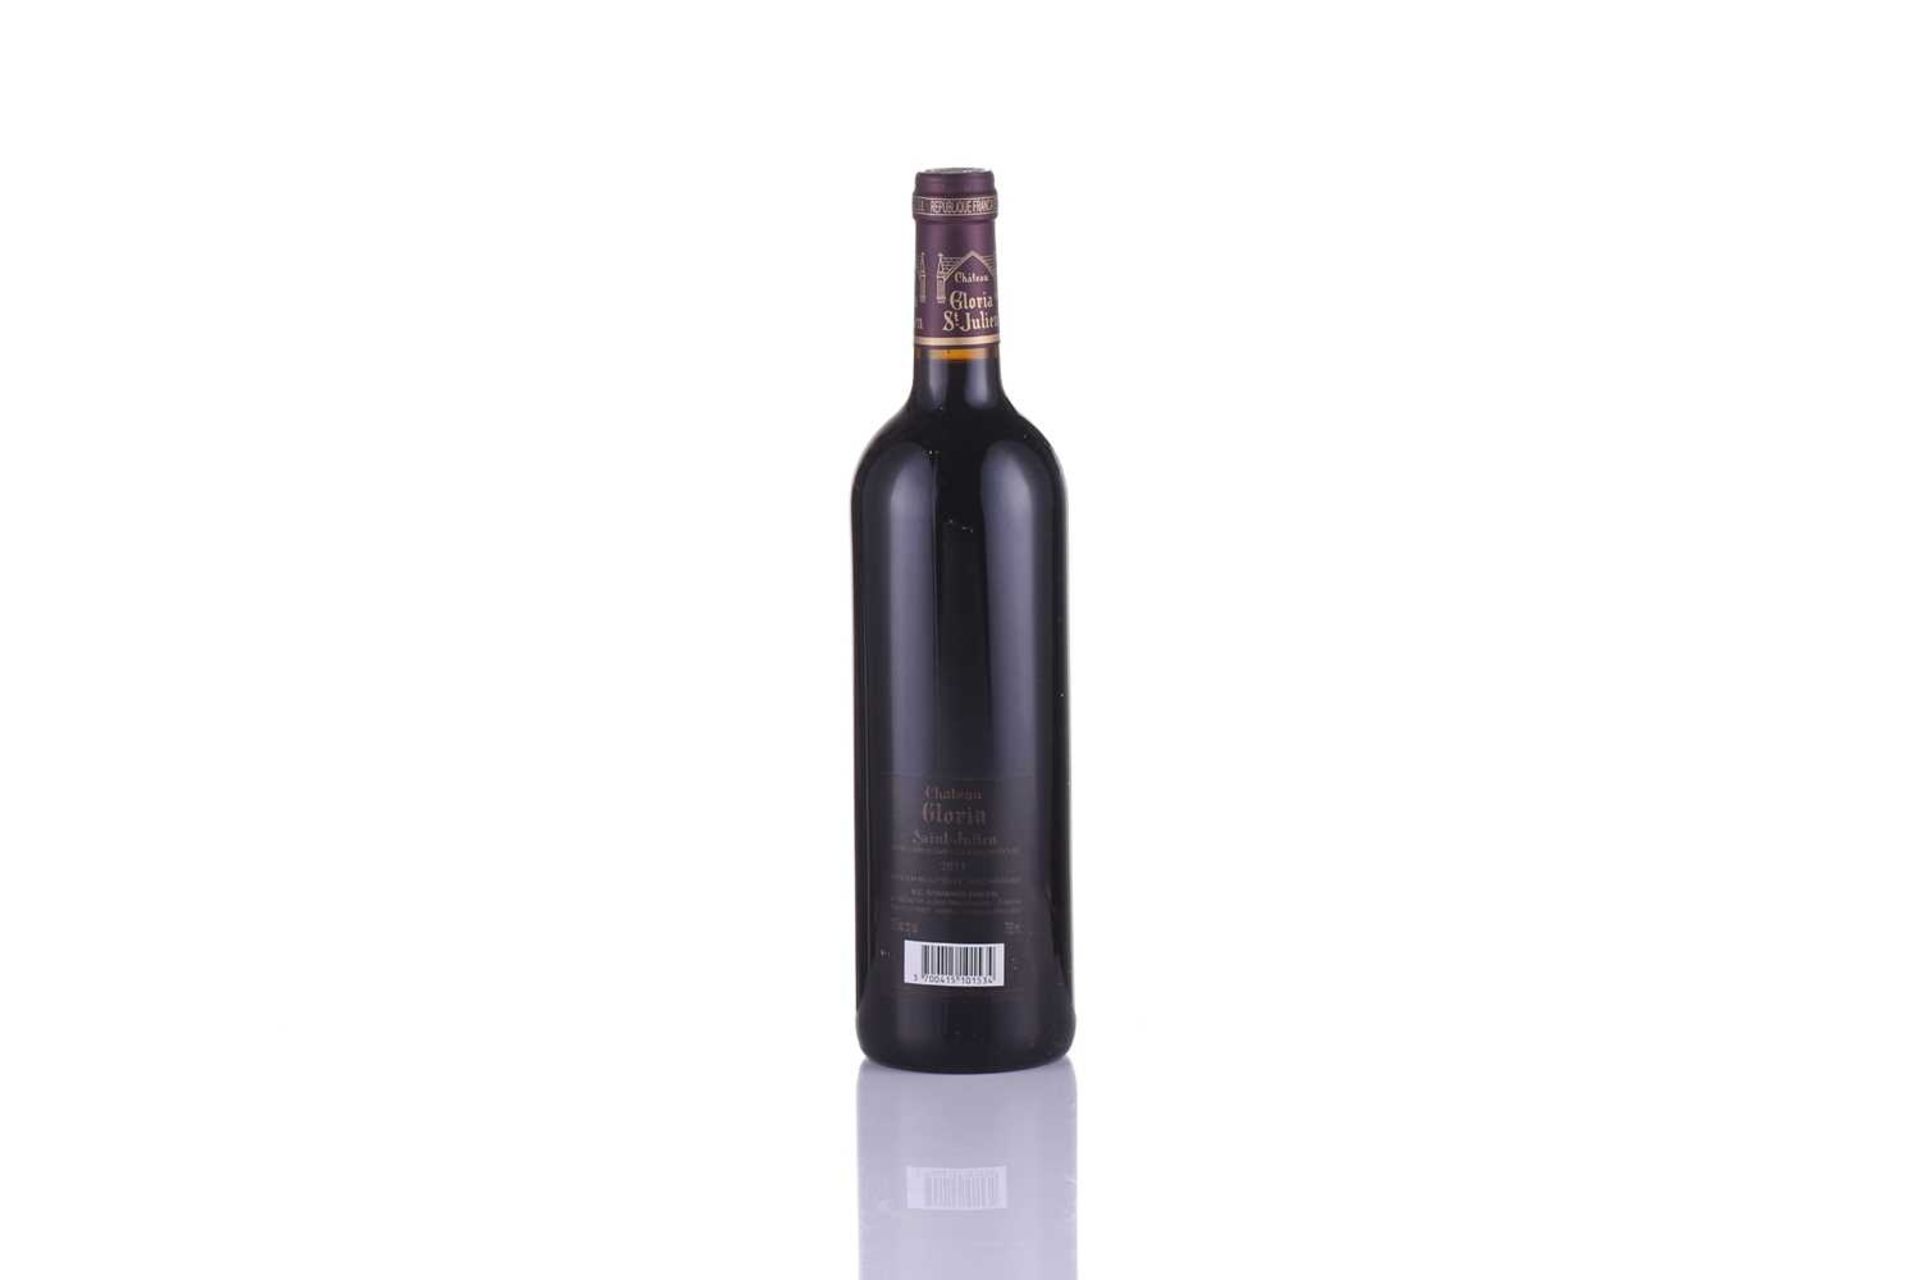 Six bottles of Chateau Gloria St Julien Bordeaux, 2011, OWCPrivate collector in London Unopened - Image 15 of 21